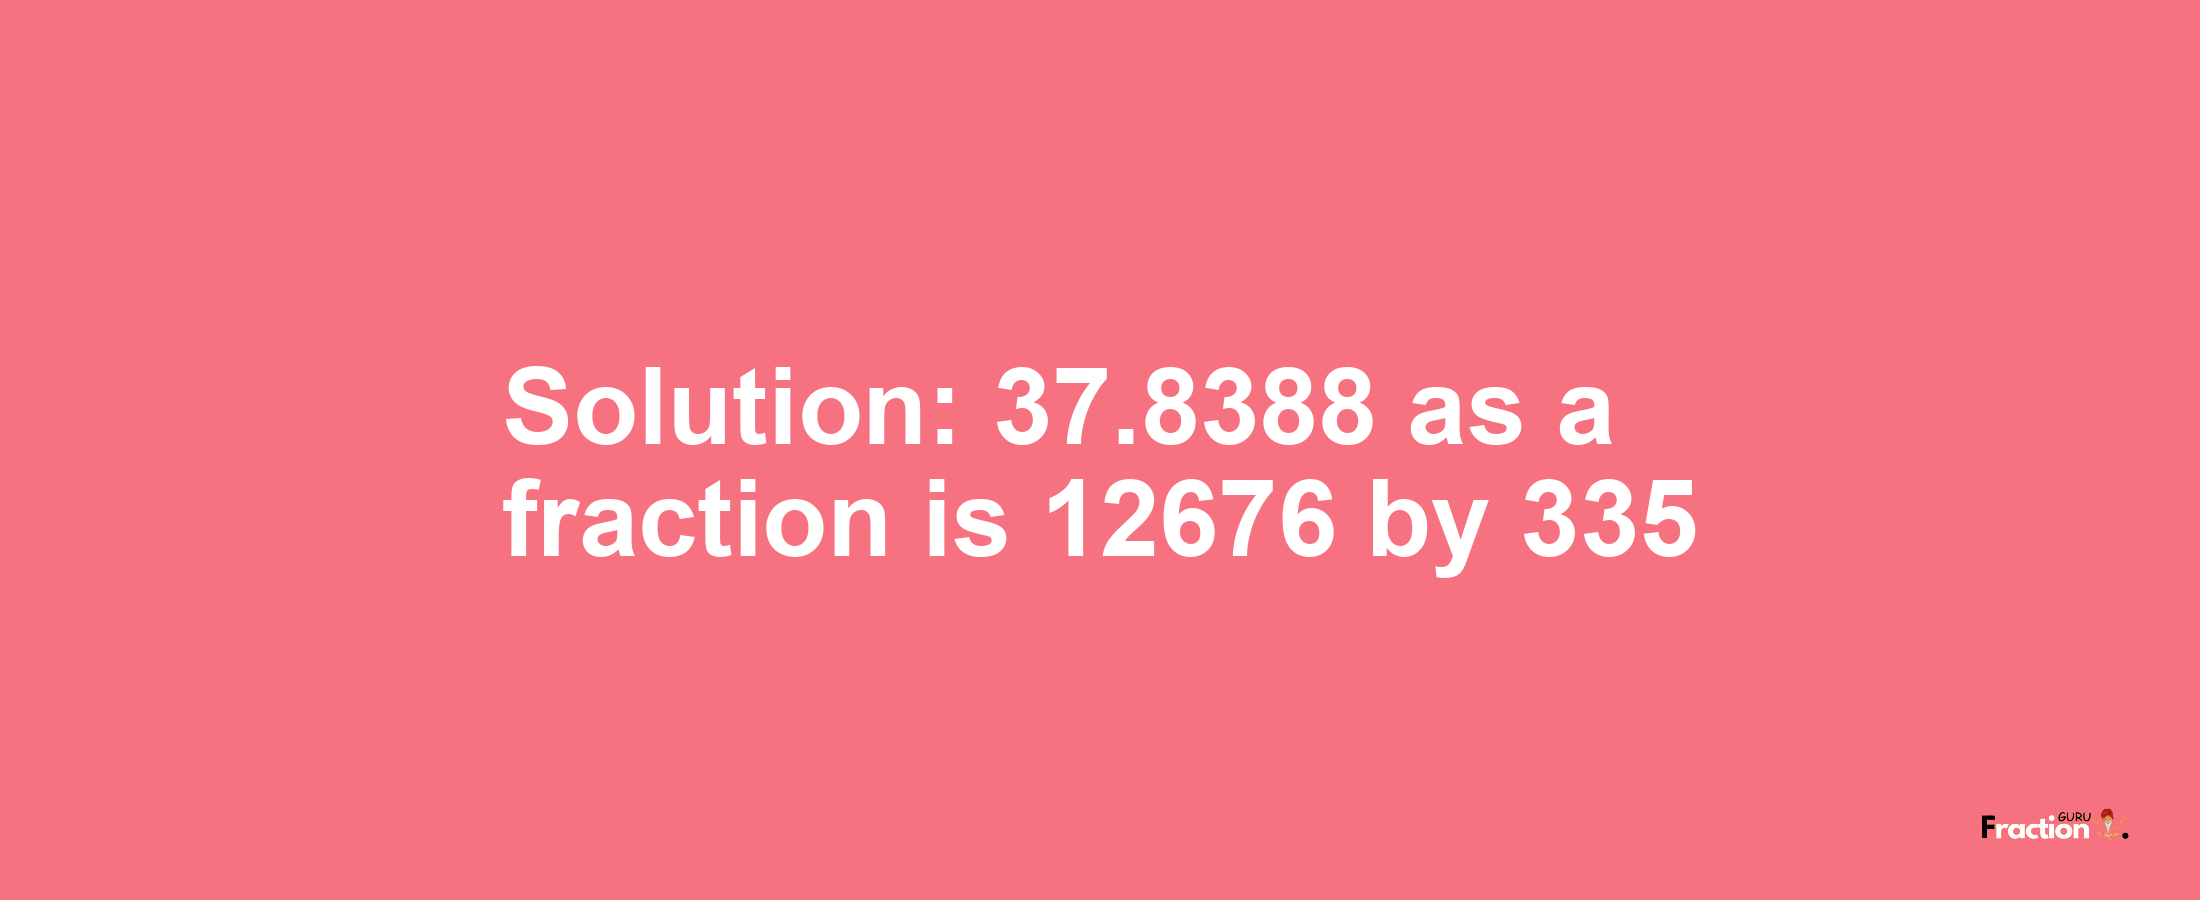 Solution:37.8388 as a fraction is 12676/335